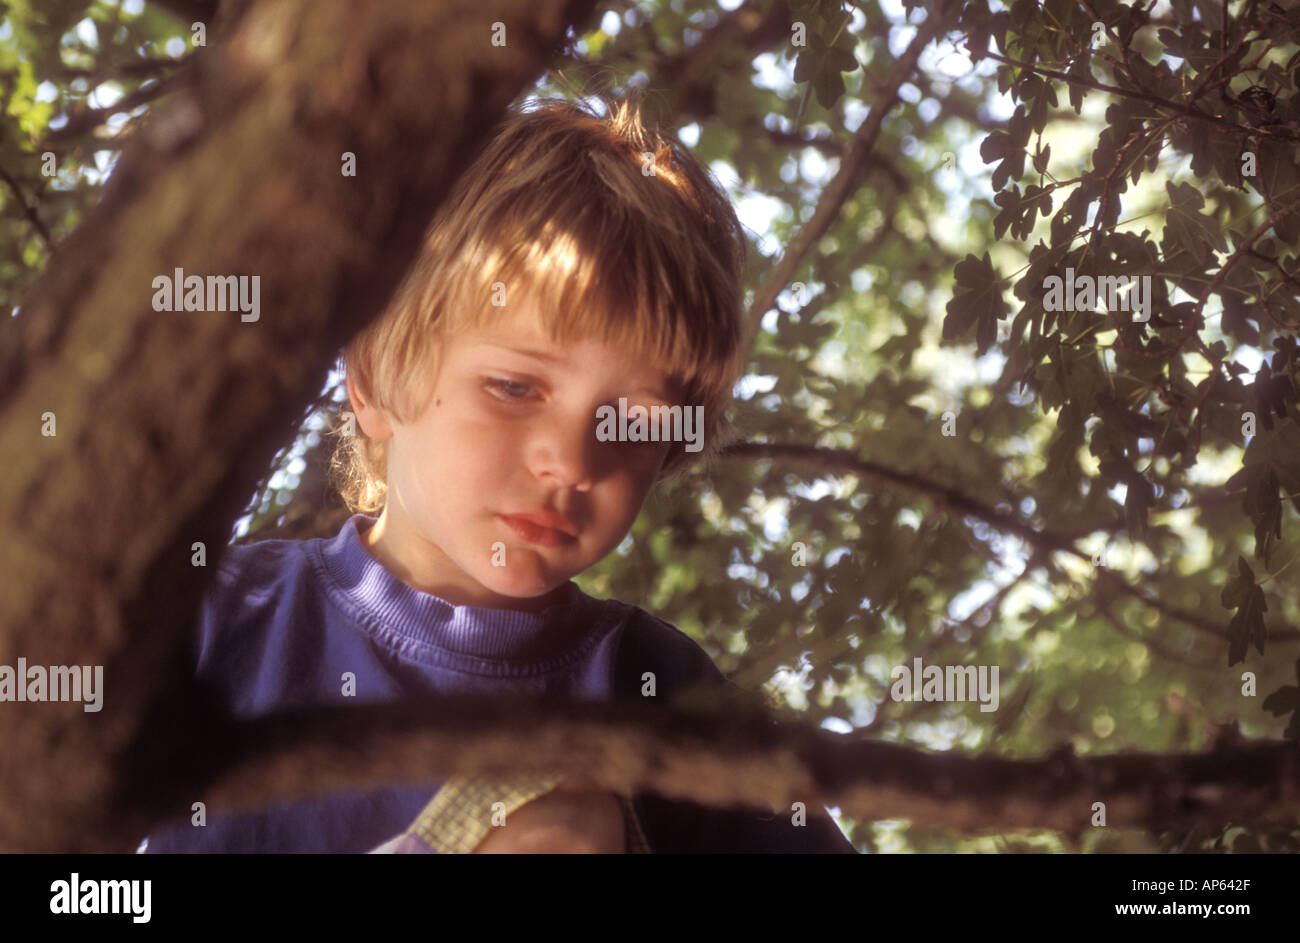 little boy stuck up a tree and looking worried Stock Photo